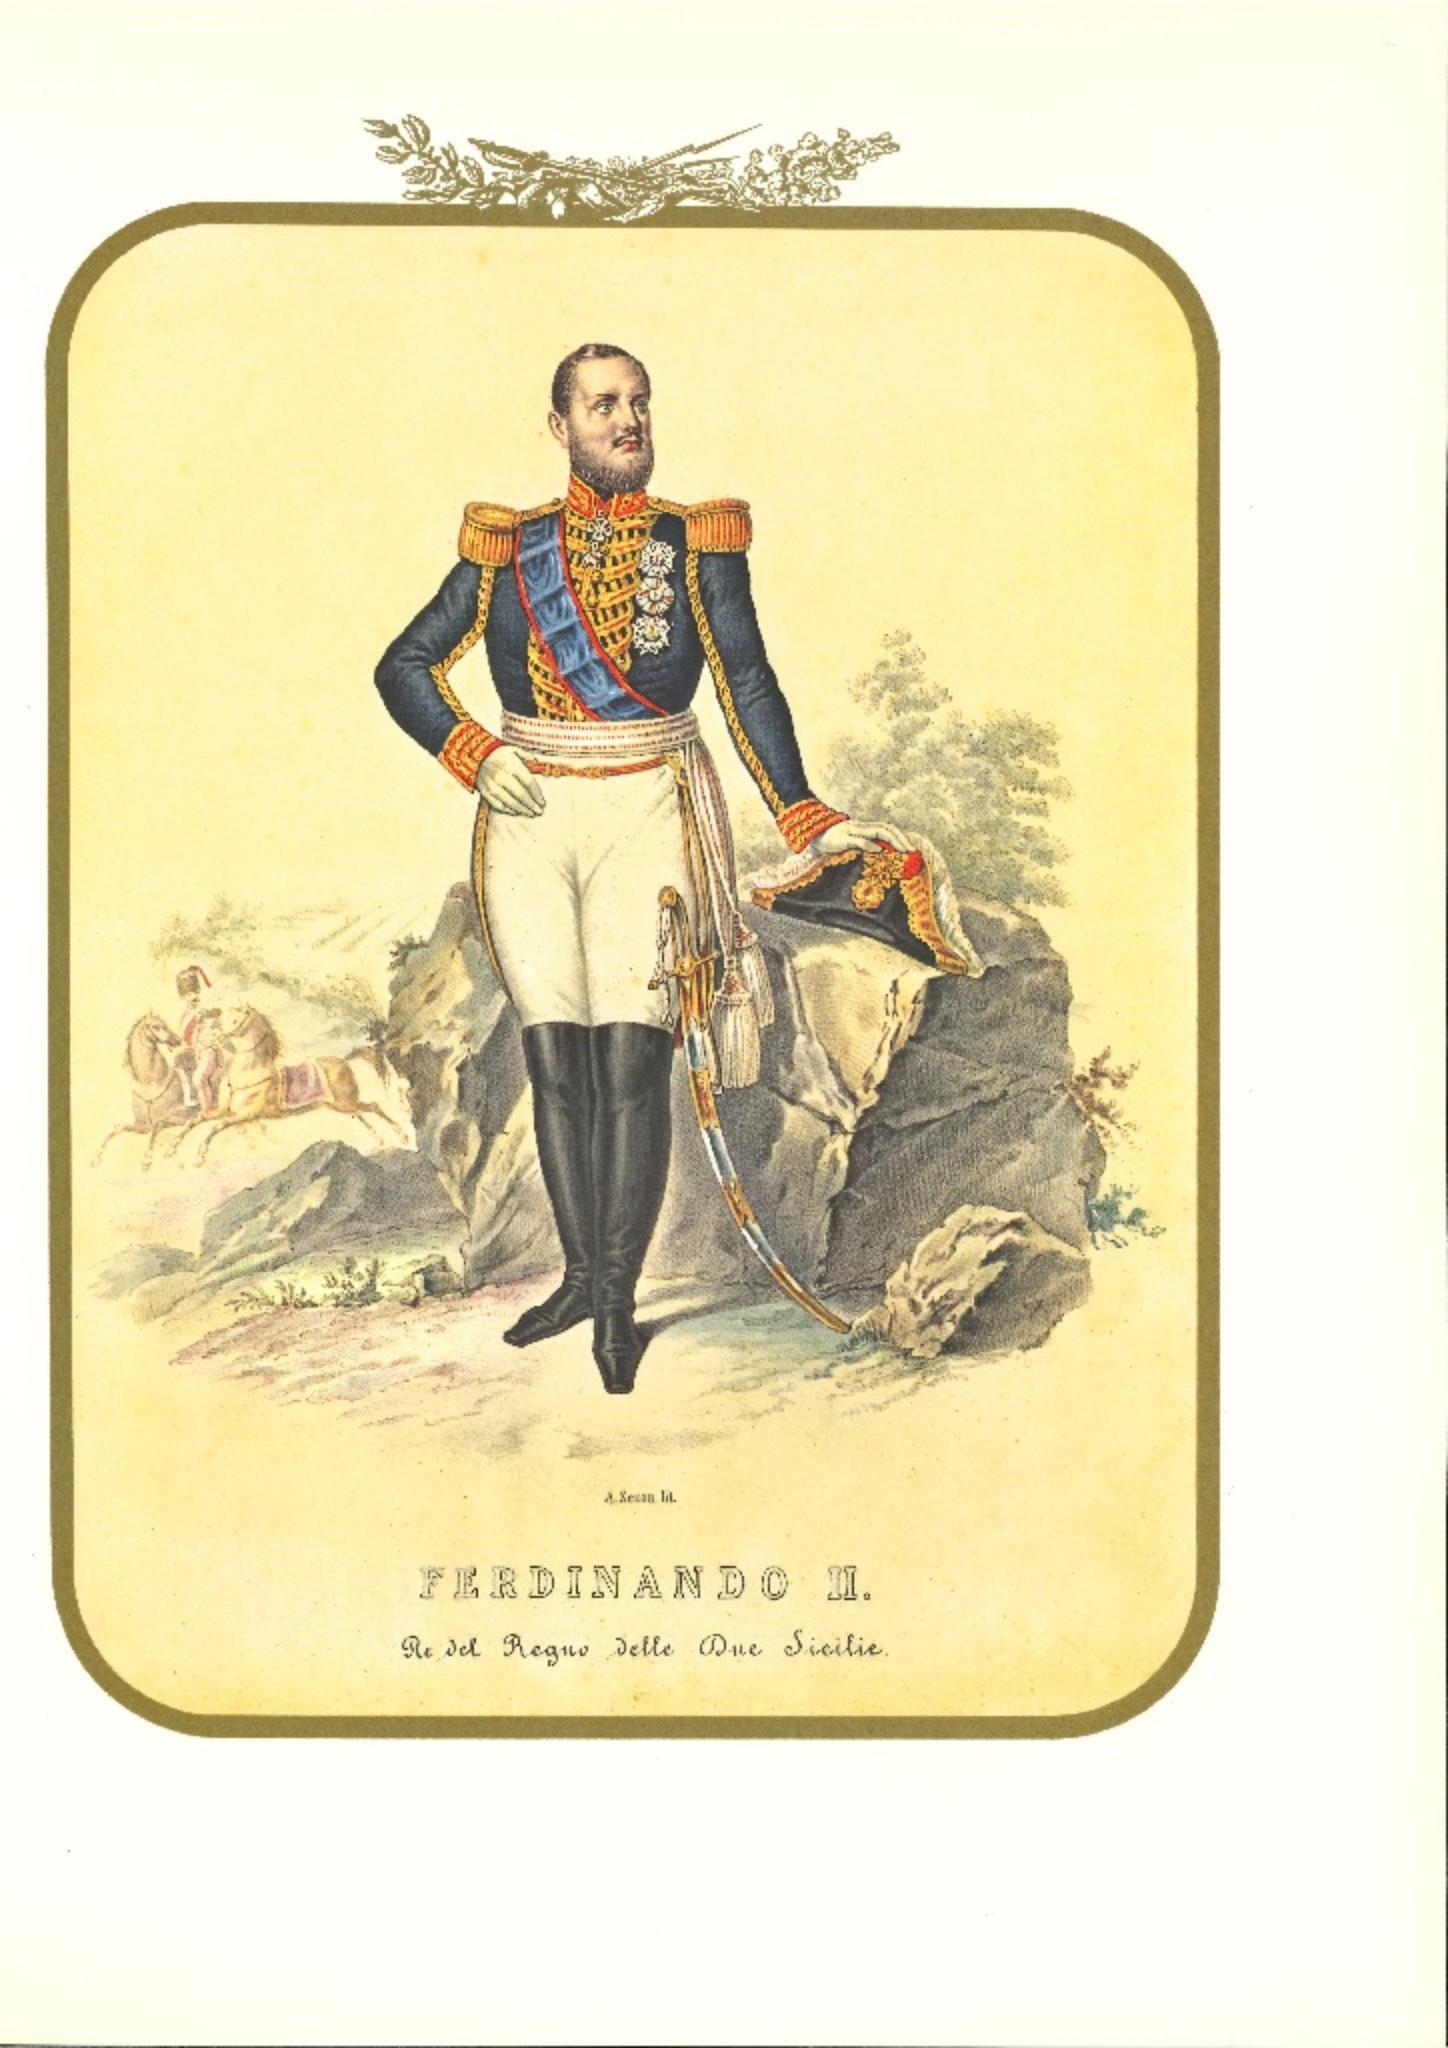 King Ferdinand II is a lithograph by Antonio Zezon.

Interesting colored lithograph which describes the arrival of Ferdinand II, with the uniform of Captain General, during the Sicilian war.

In excellent condition, this print belongs to one of the